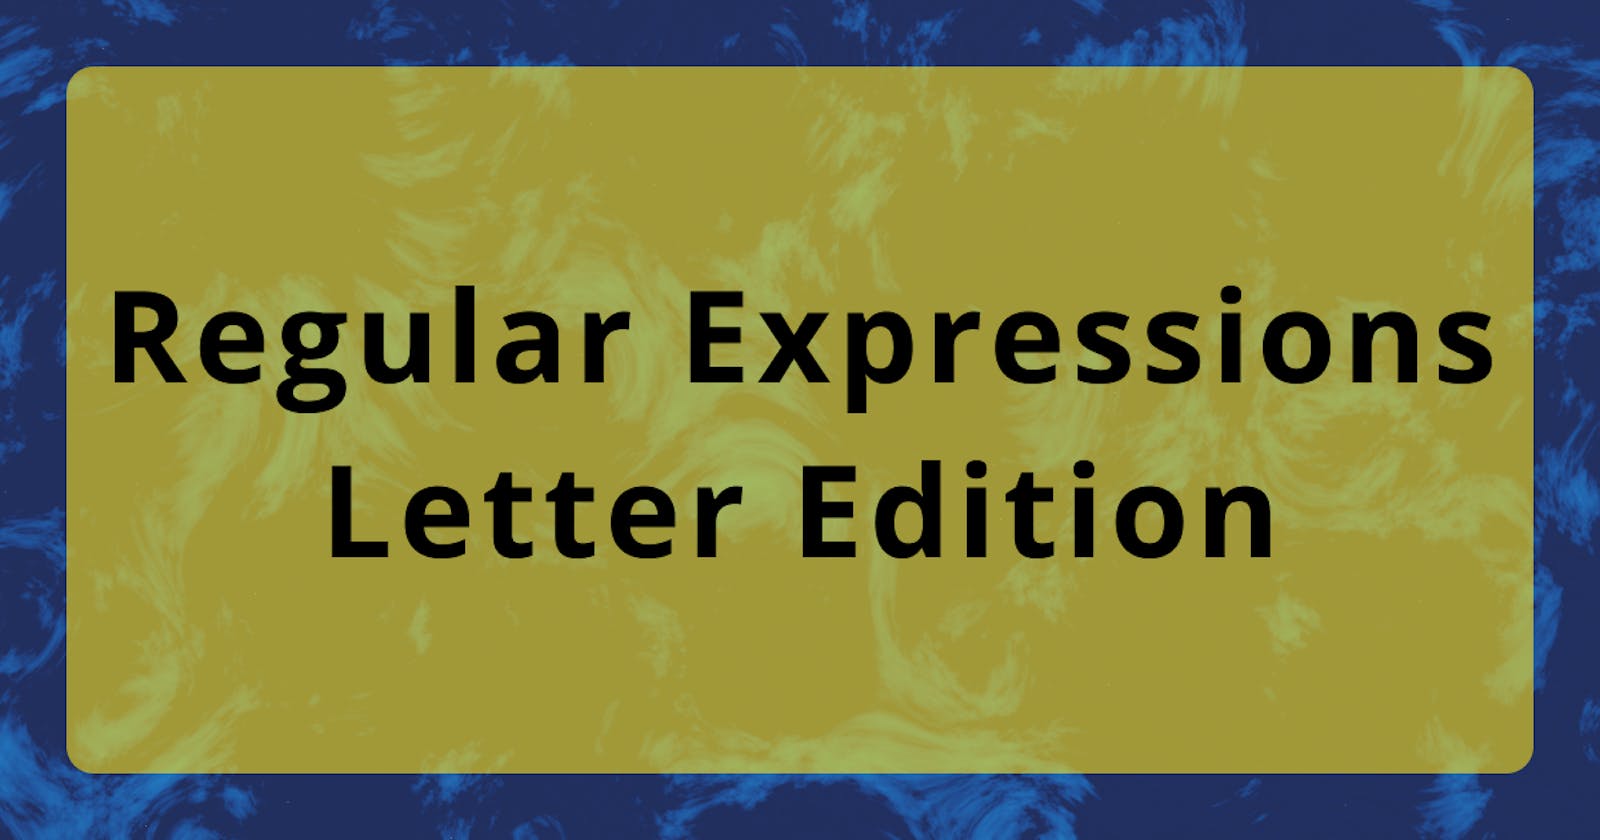 😬 Regular Expressions - Letter Edition 😬